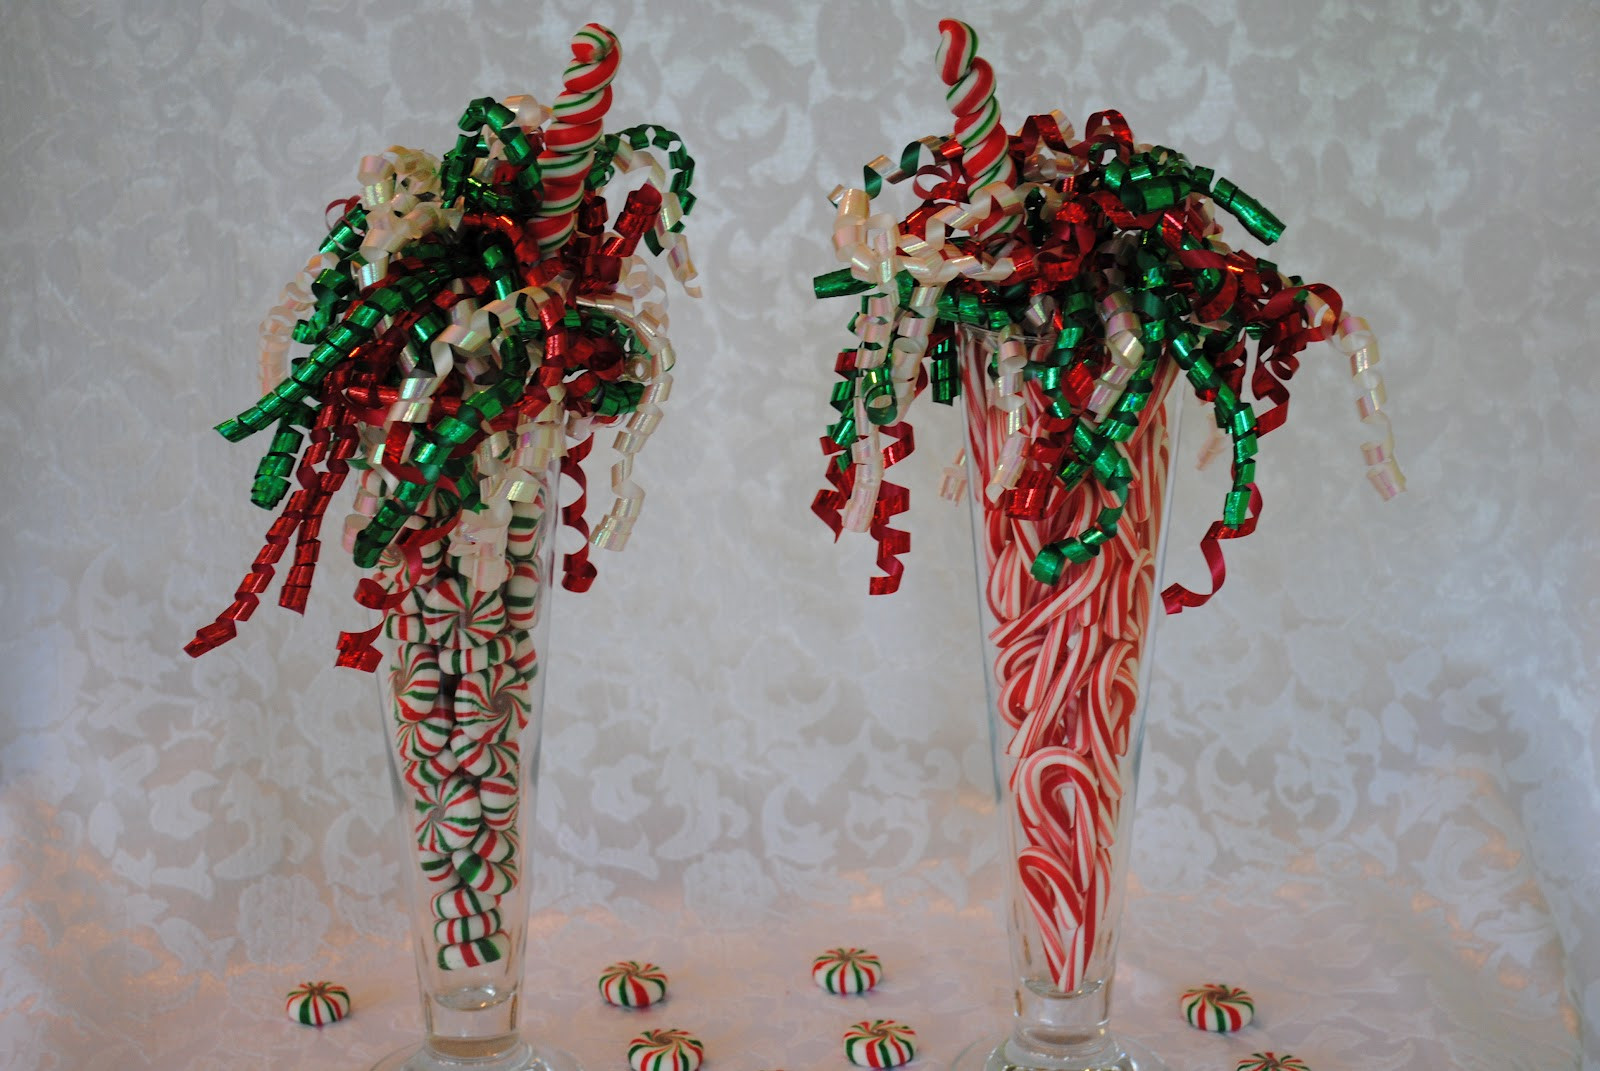 Christmas Candy Gift Ideas
 Christmas Holiday Ideas SWEET GIFTS TO GIVE CANDY SUNDAES